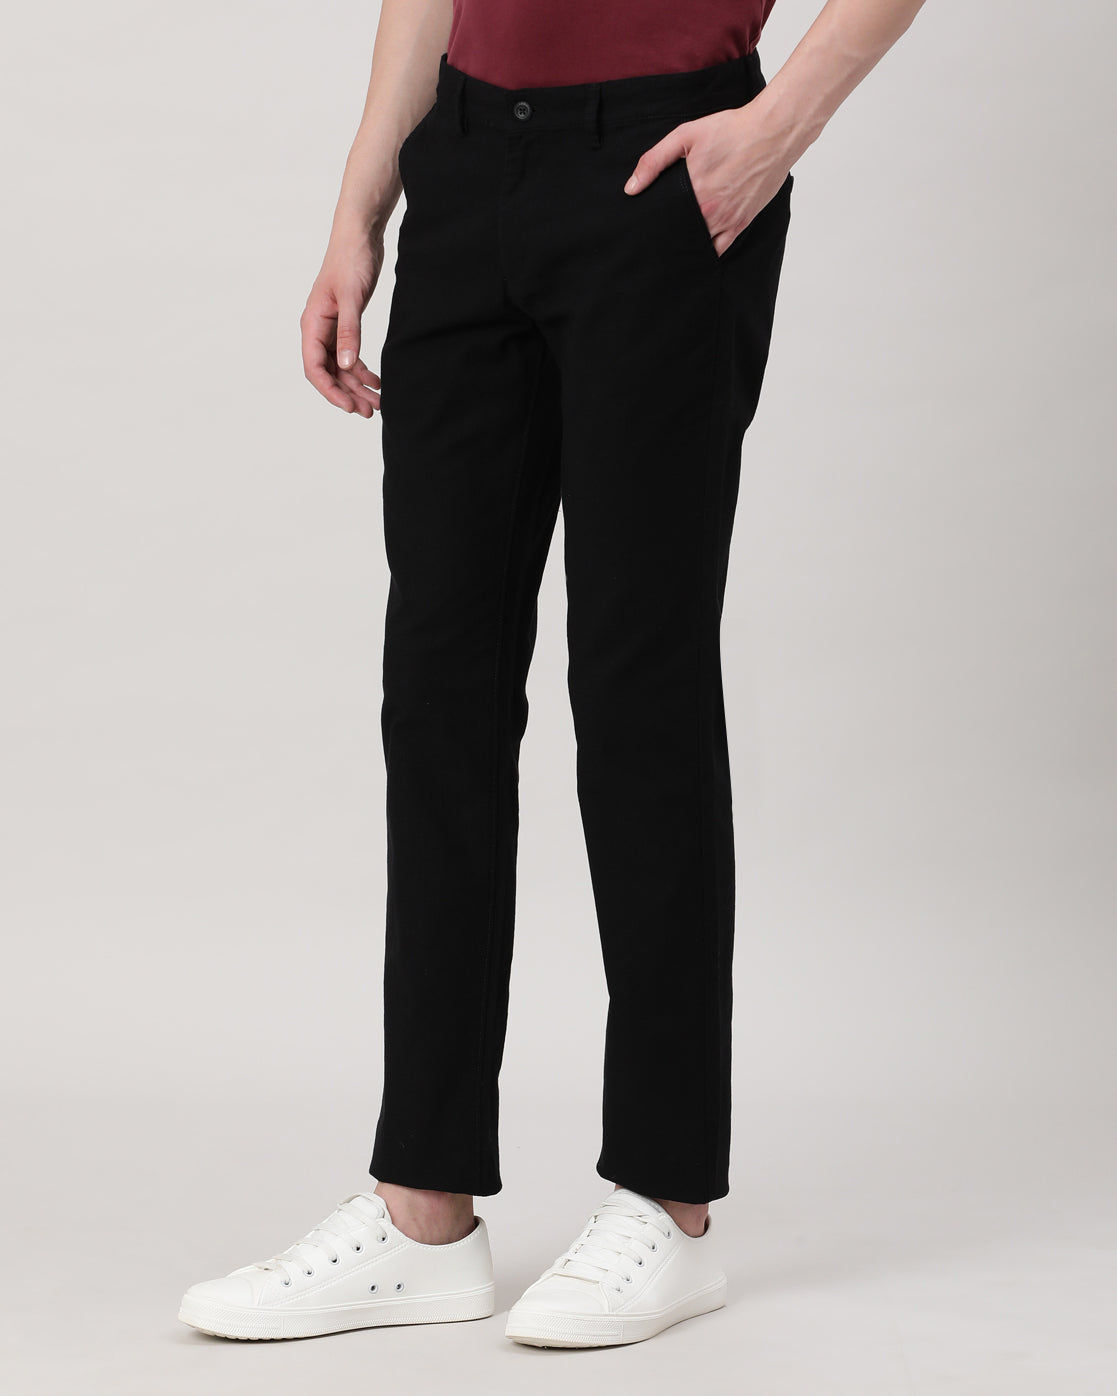 Crocodile Casual Trousers Slim Fit Solid Black for Men